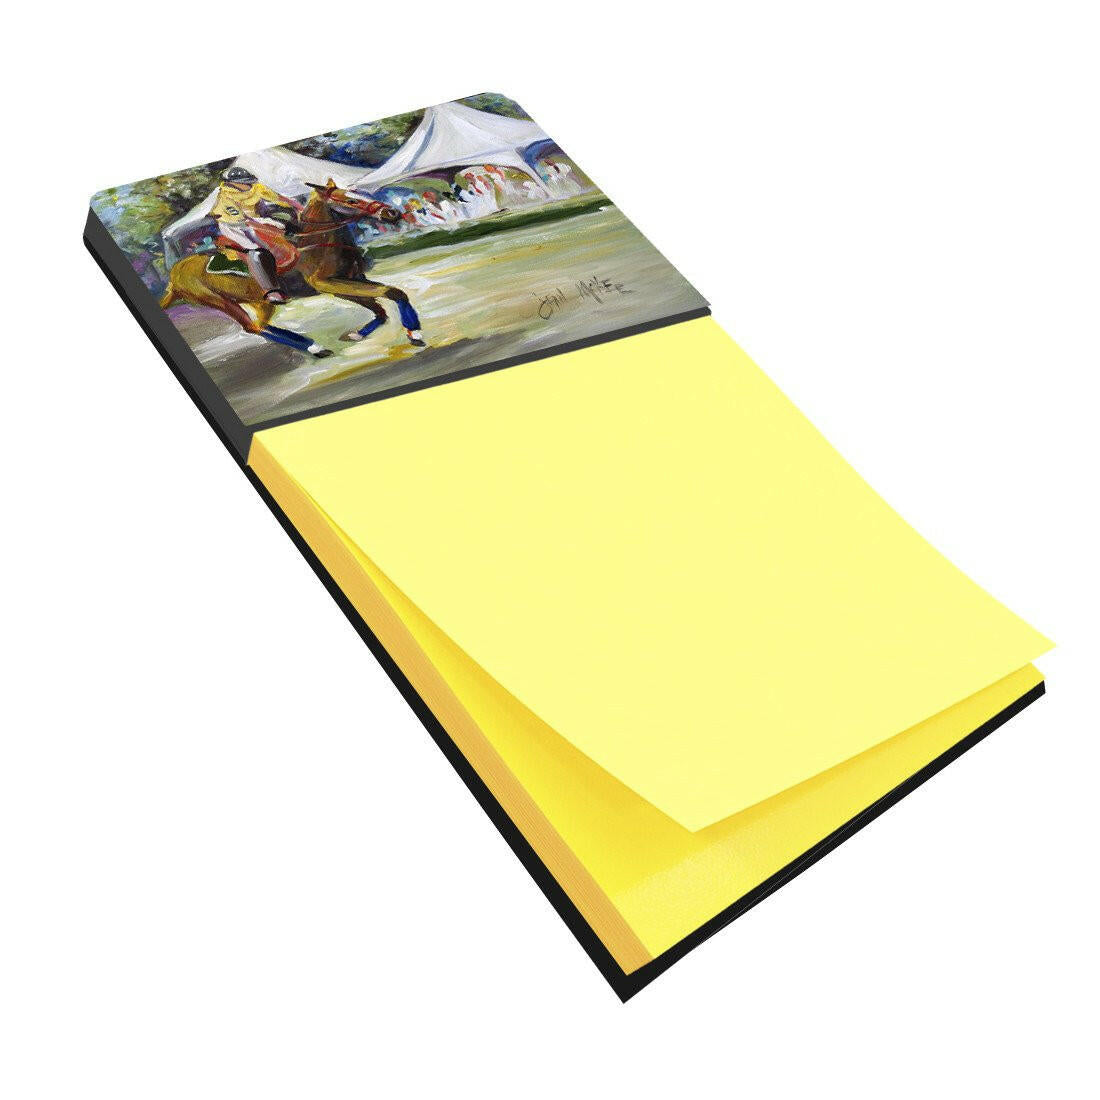 Polo at the Point Sticky Note Holder JMK1008SN by Caroline's Treasures